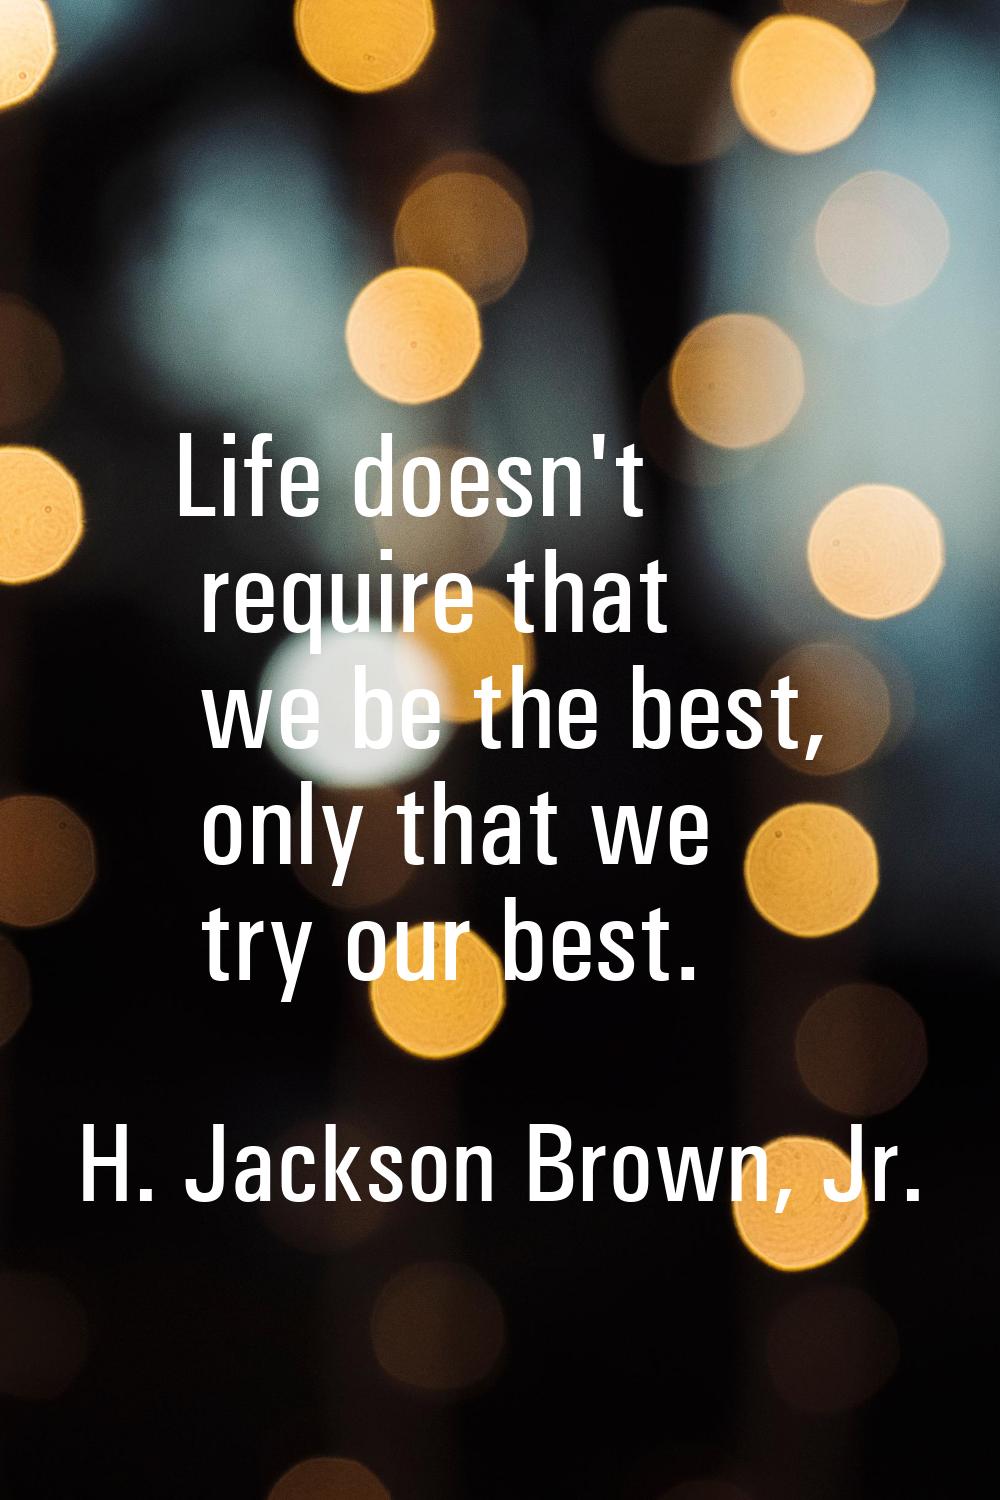 Life doesn't require that we be the best, only that we try our best.